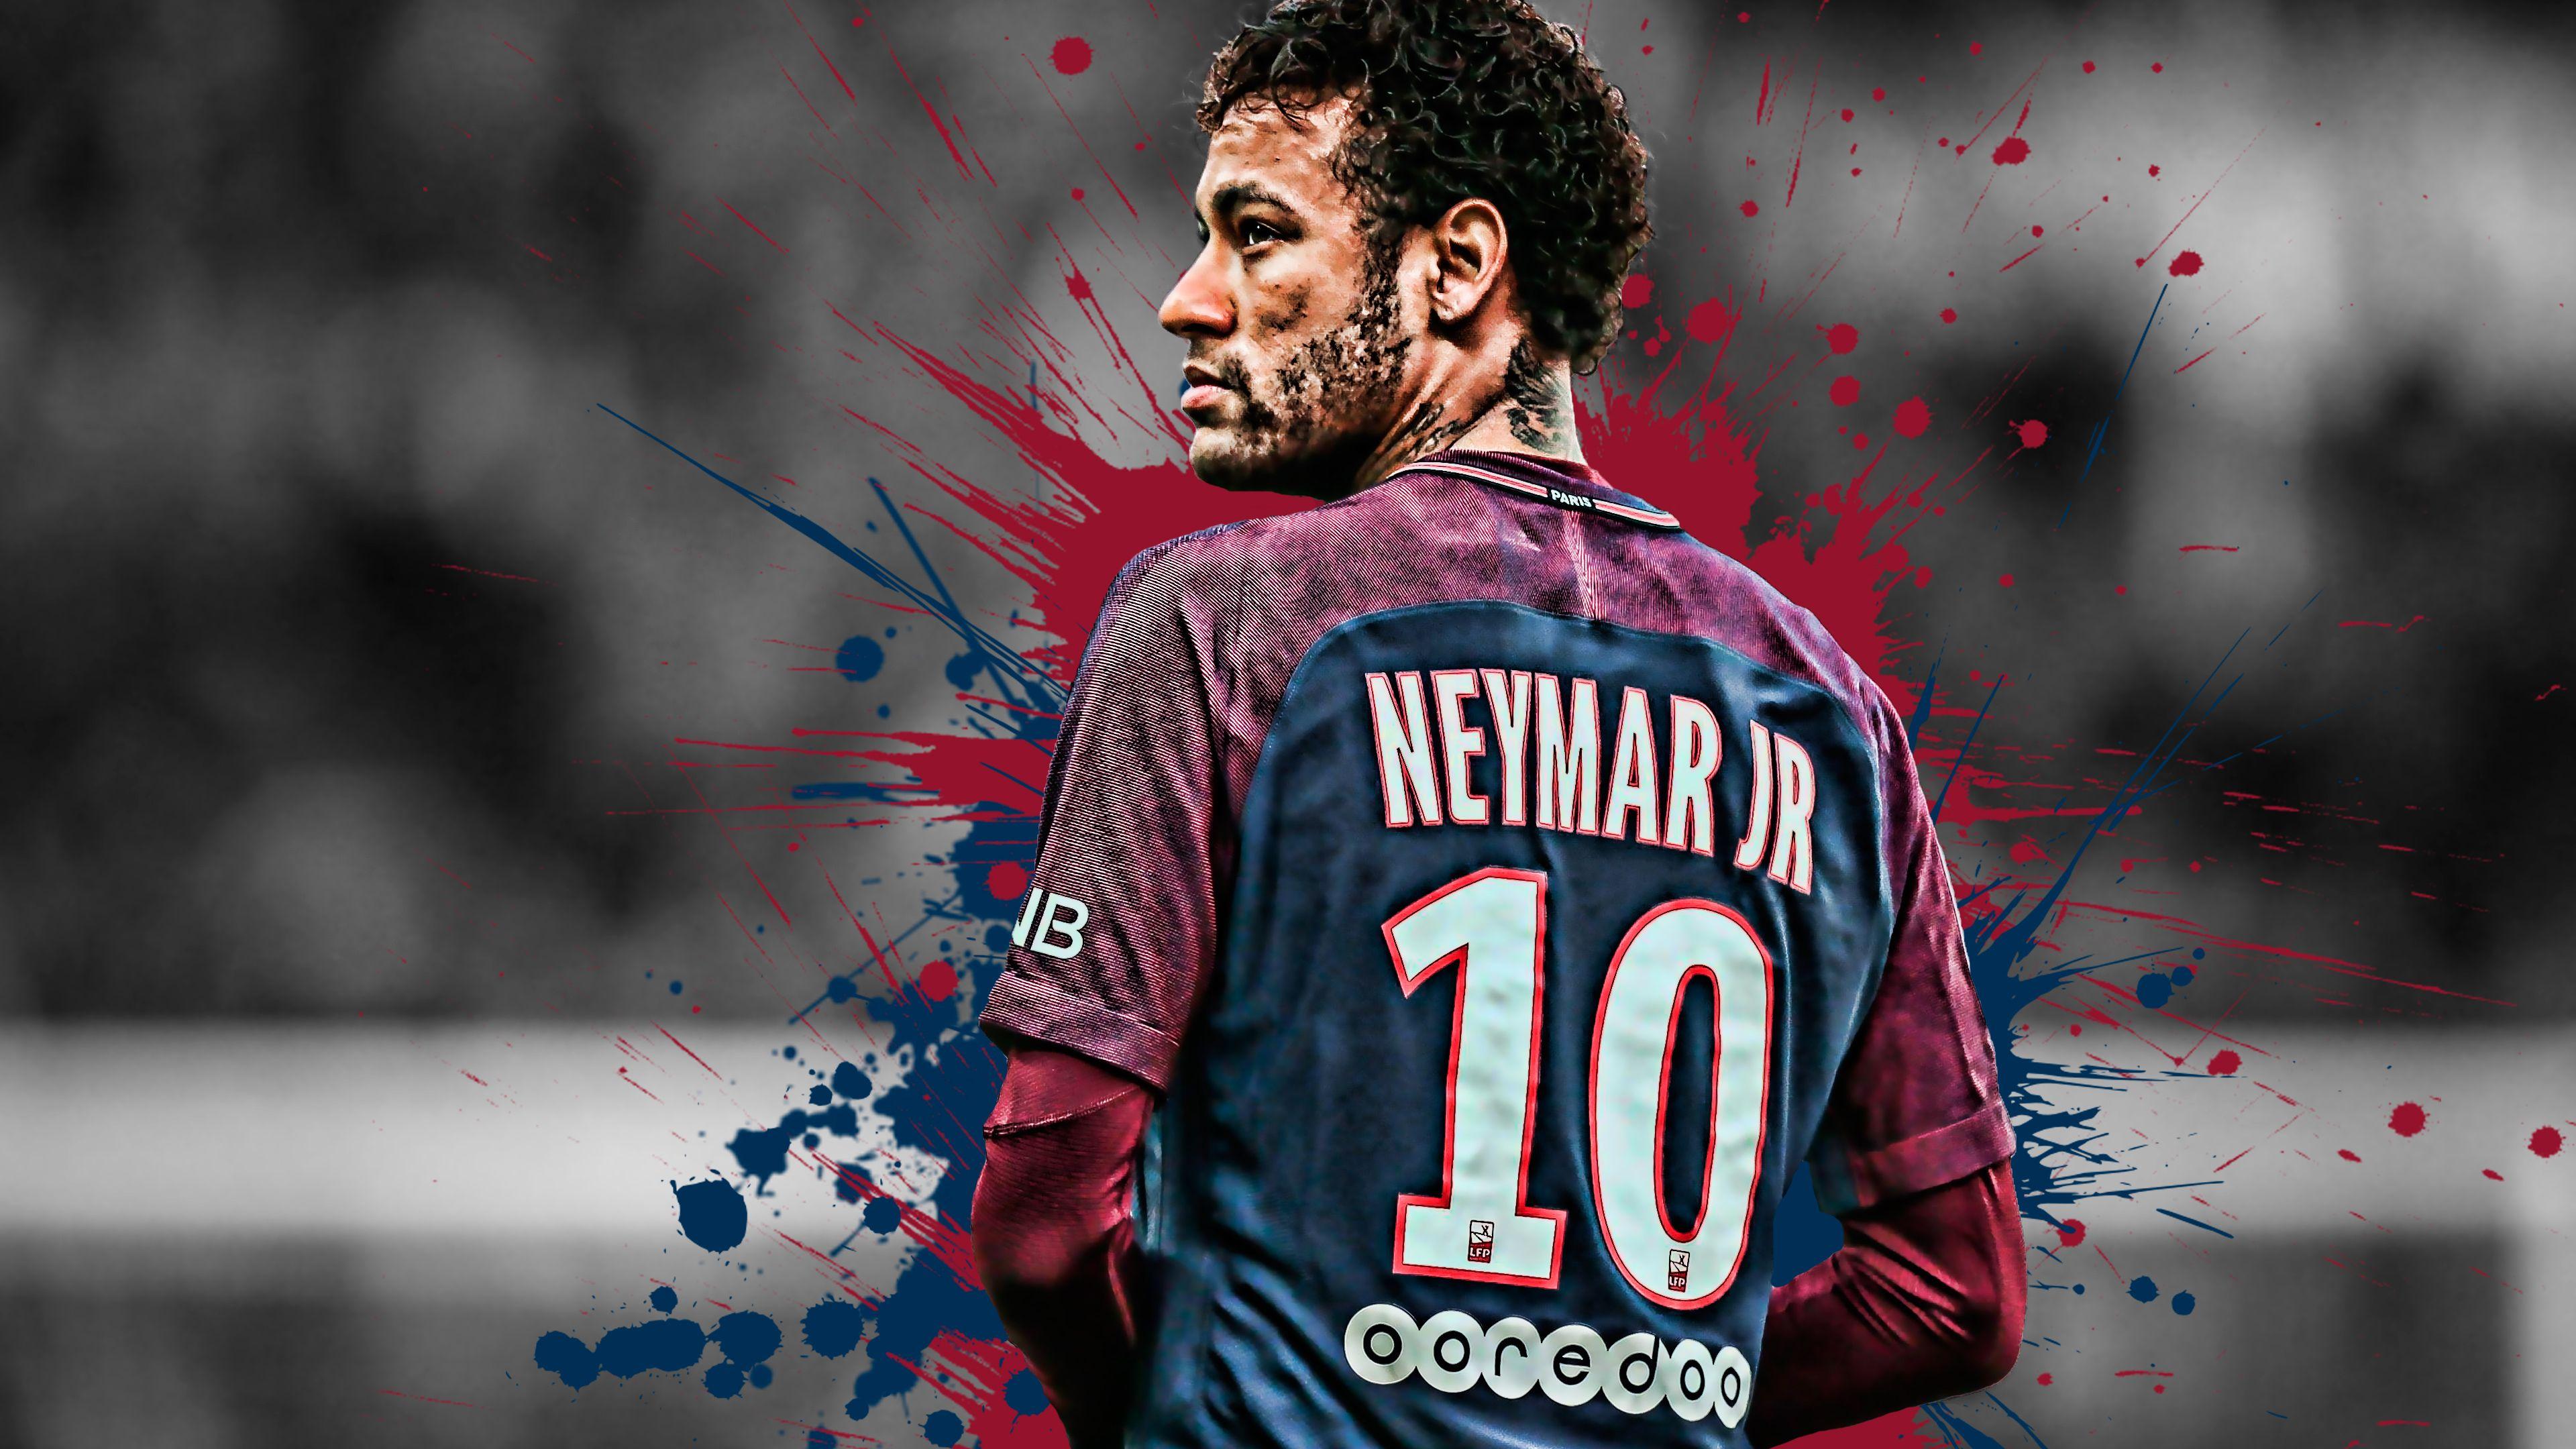 50+ Footballer HD Wallpapers and Backgrounds